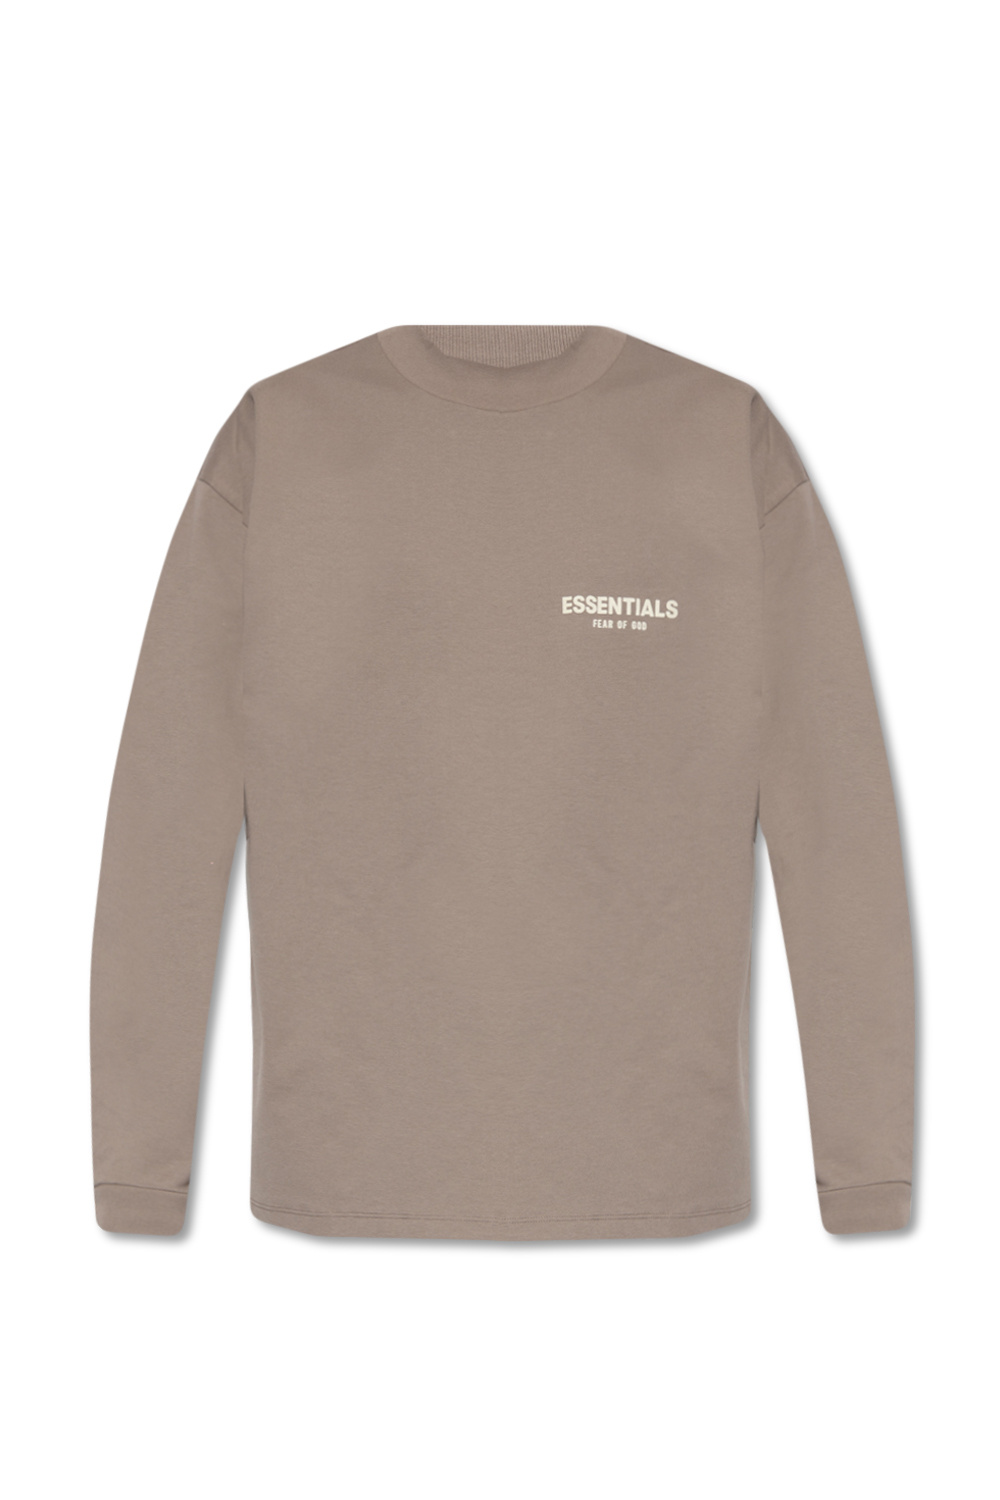 Fear Of God Essentials T-shirt with long sleeves | Men's Clothing 